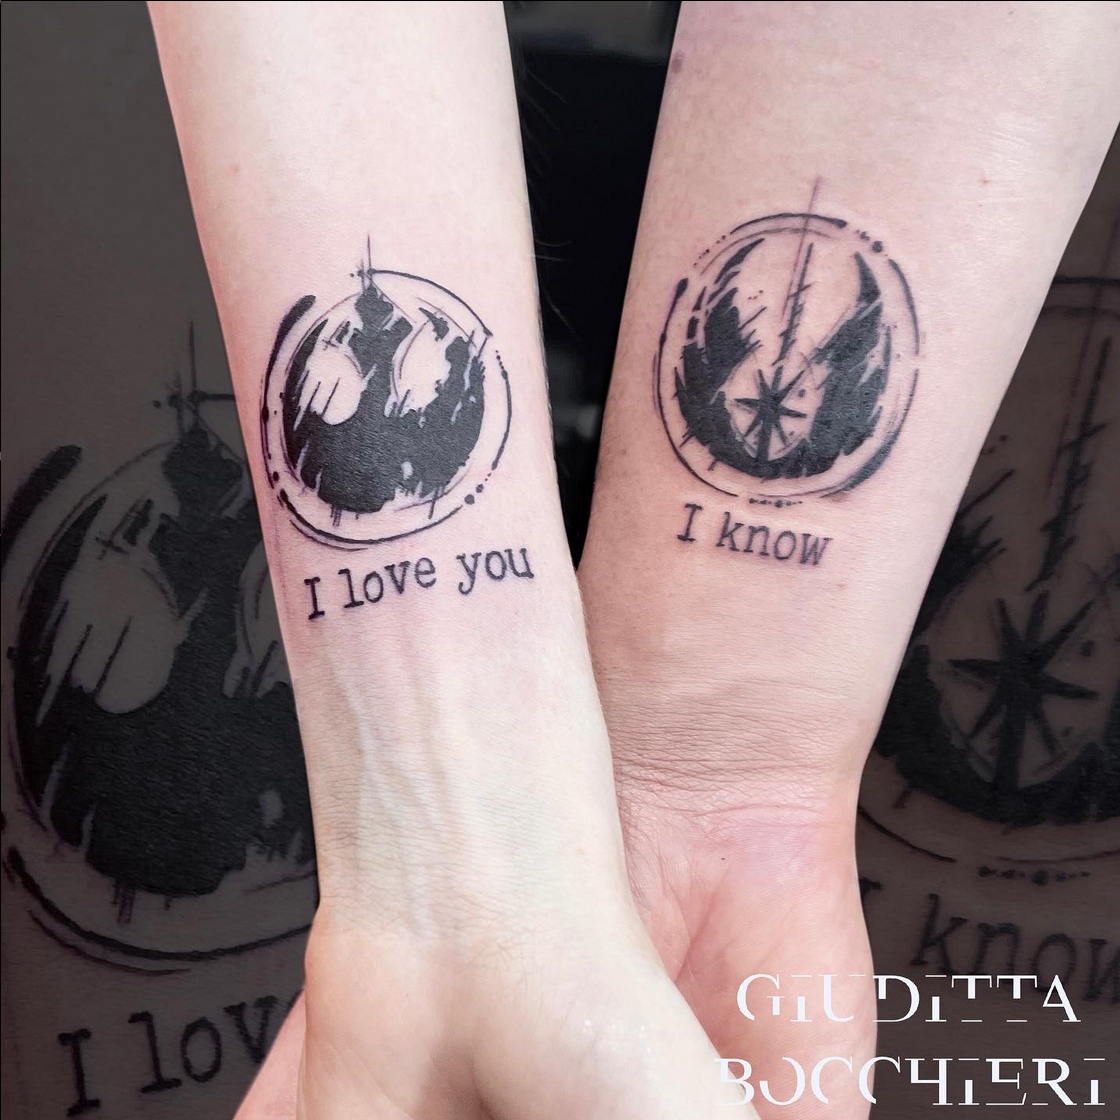 Tattoo tagged with small matching matching tattoos for couples single  needle conventional heart tiny mrk travel love star wars ifttt  little couple inner forearm film and book spacecraft heart death star  